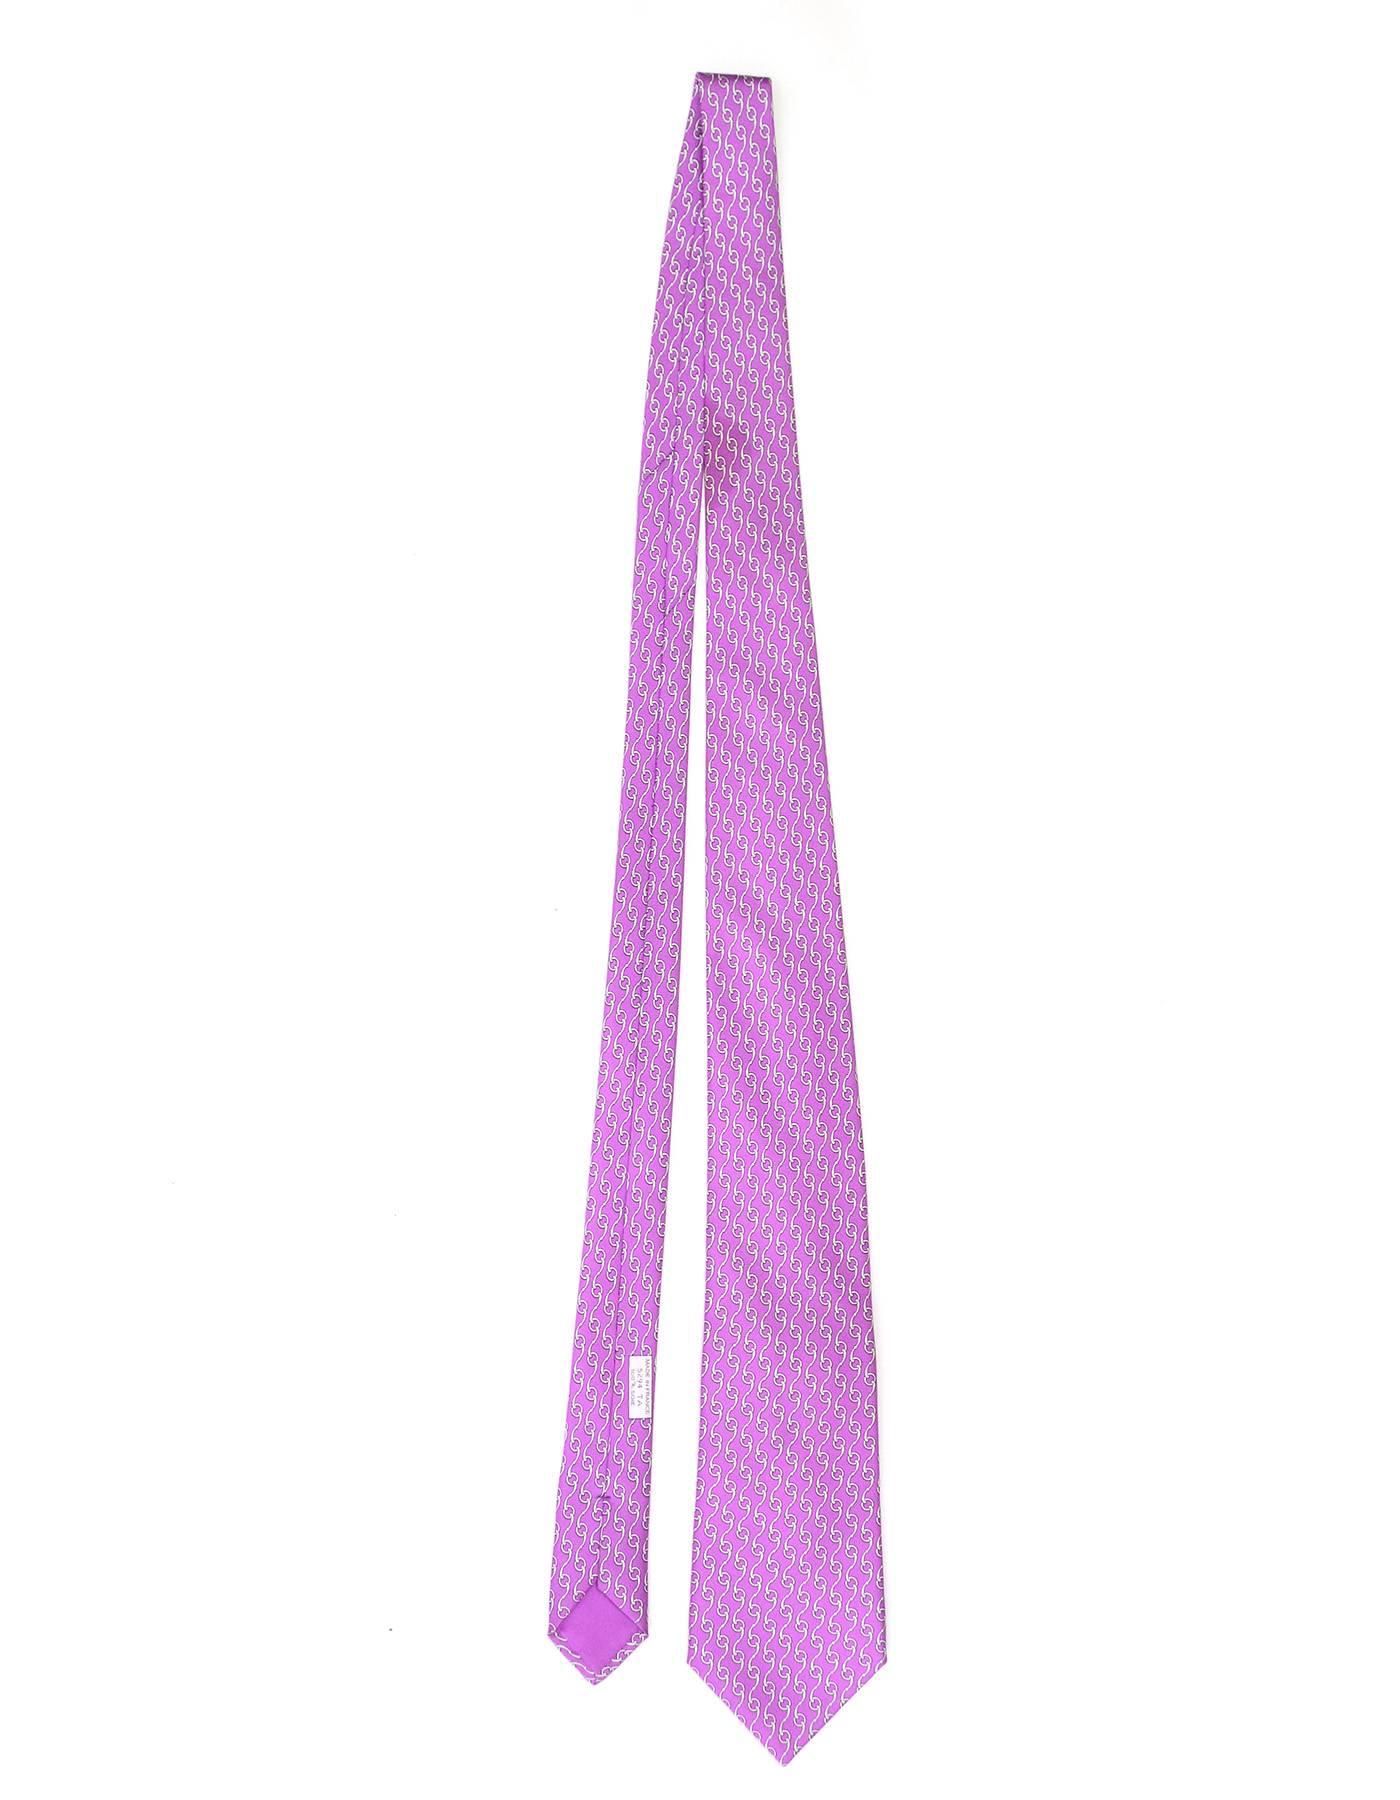 Hermes Purple & White Chain Print Silk Tie

Made In: France
Color: Purple and white
Composition: 100% silk
Retail Price: $180 + tax
Overall Condition: Excellent pre-owned condition with the exception of a faint stain to bottom front of tie (ref